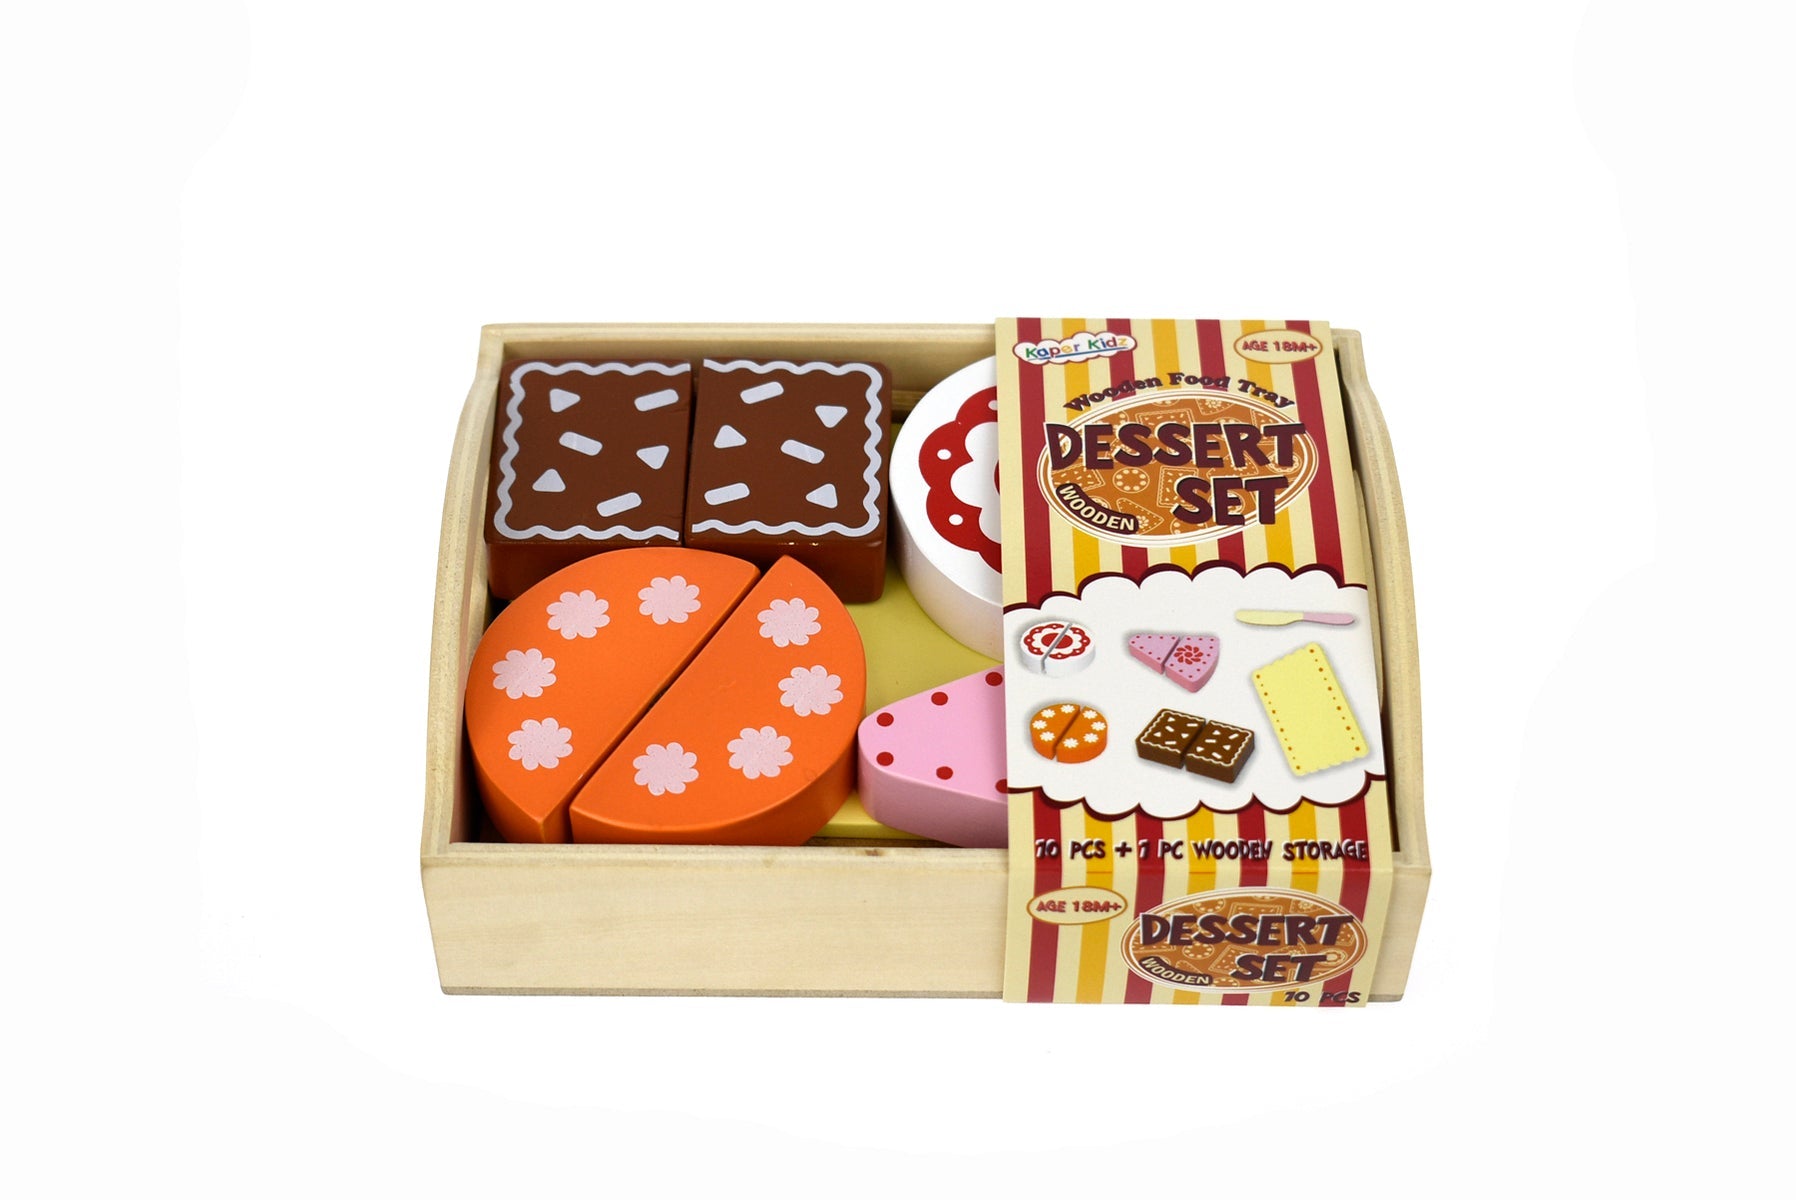 A wooden platter filled with a selection of sweet treats